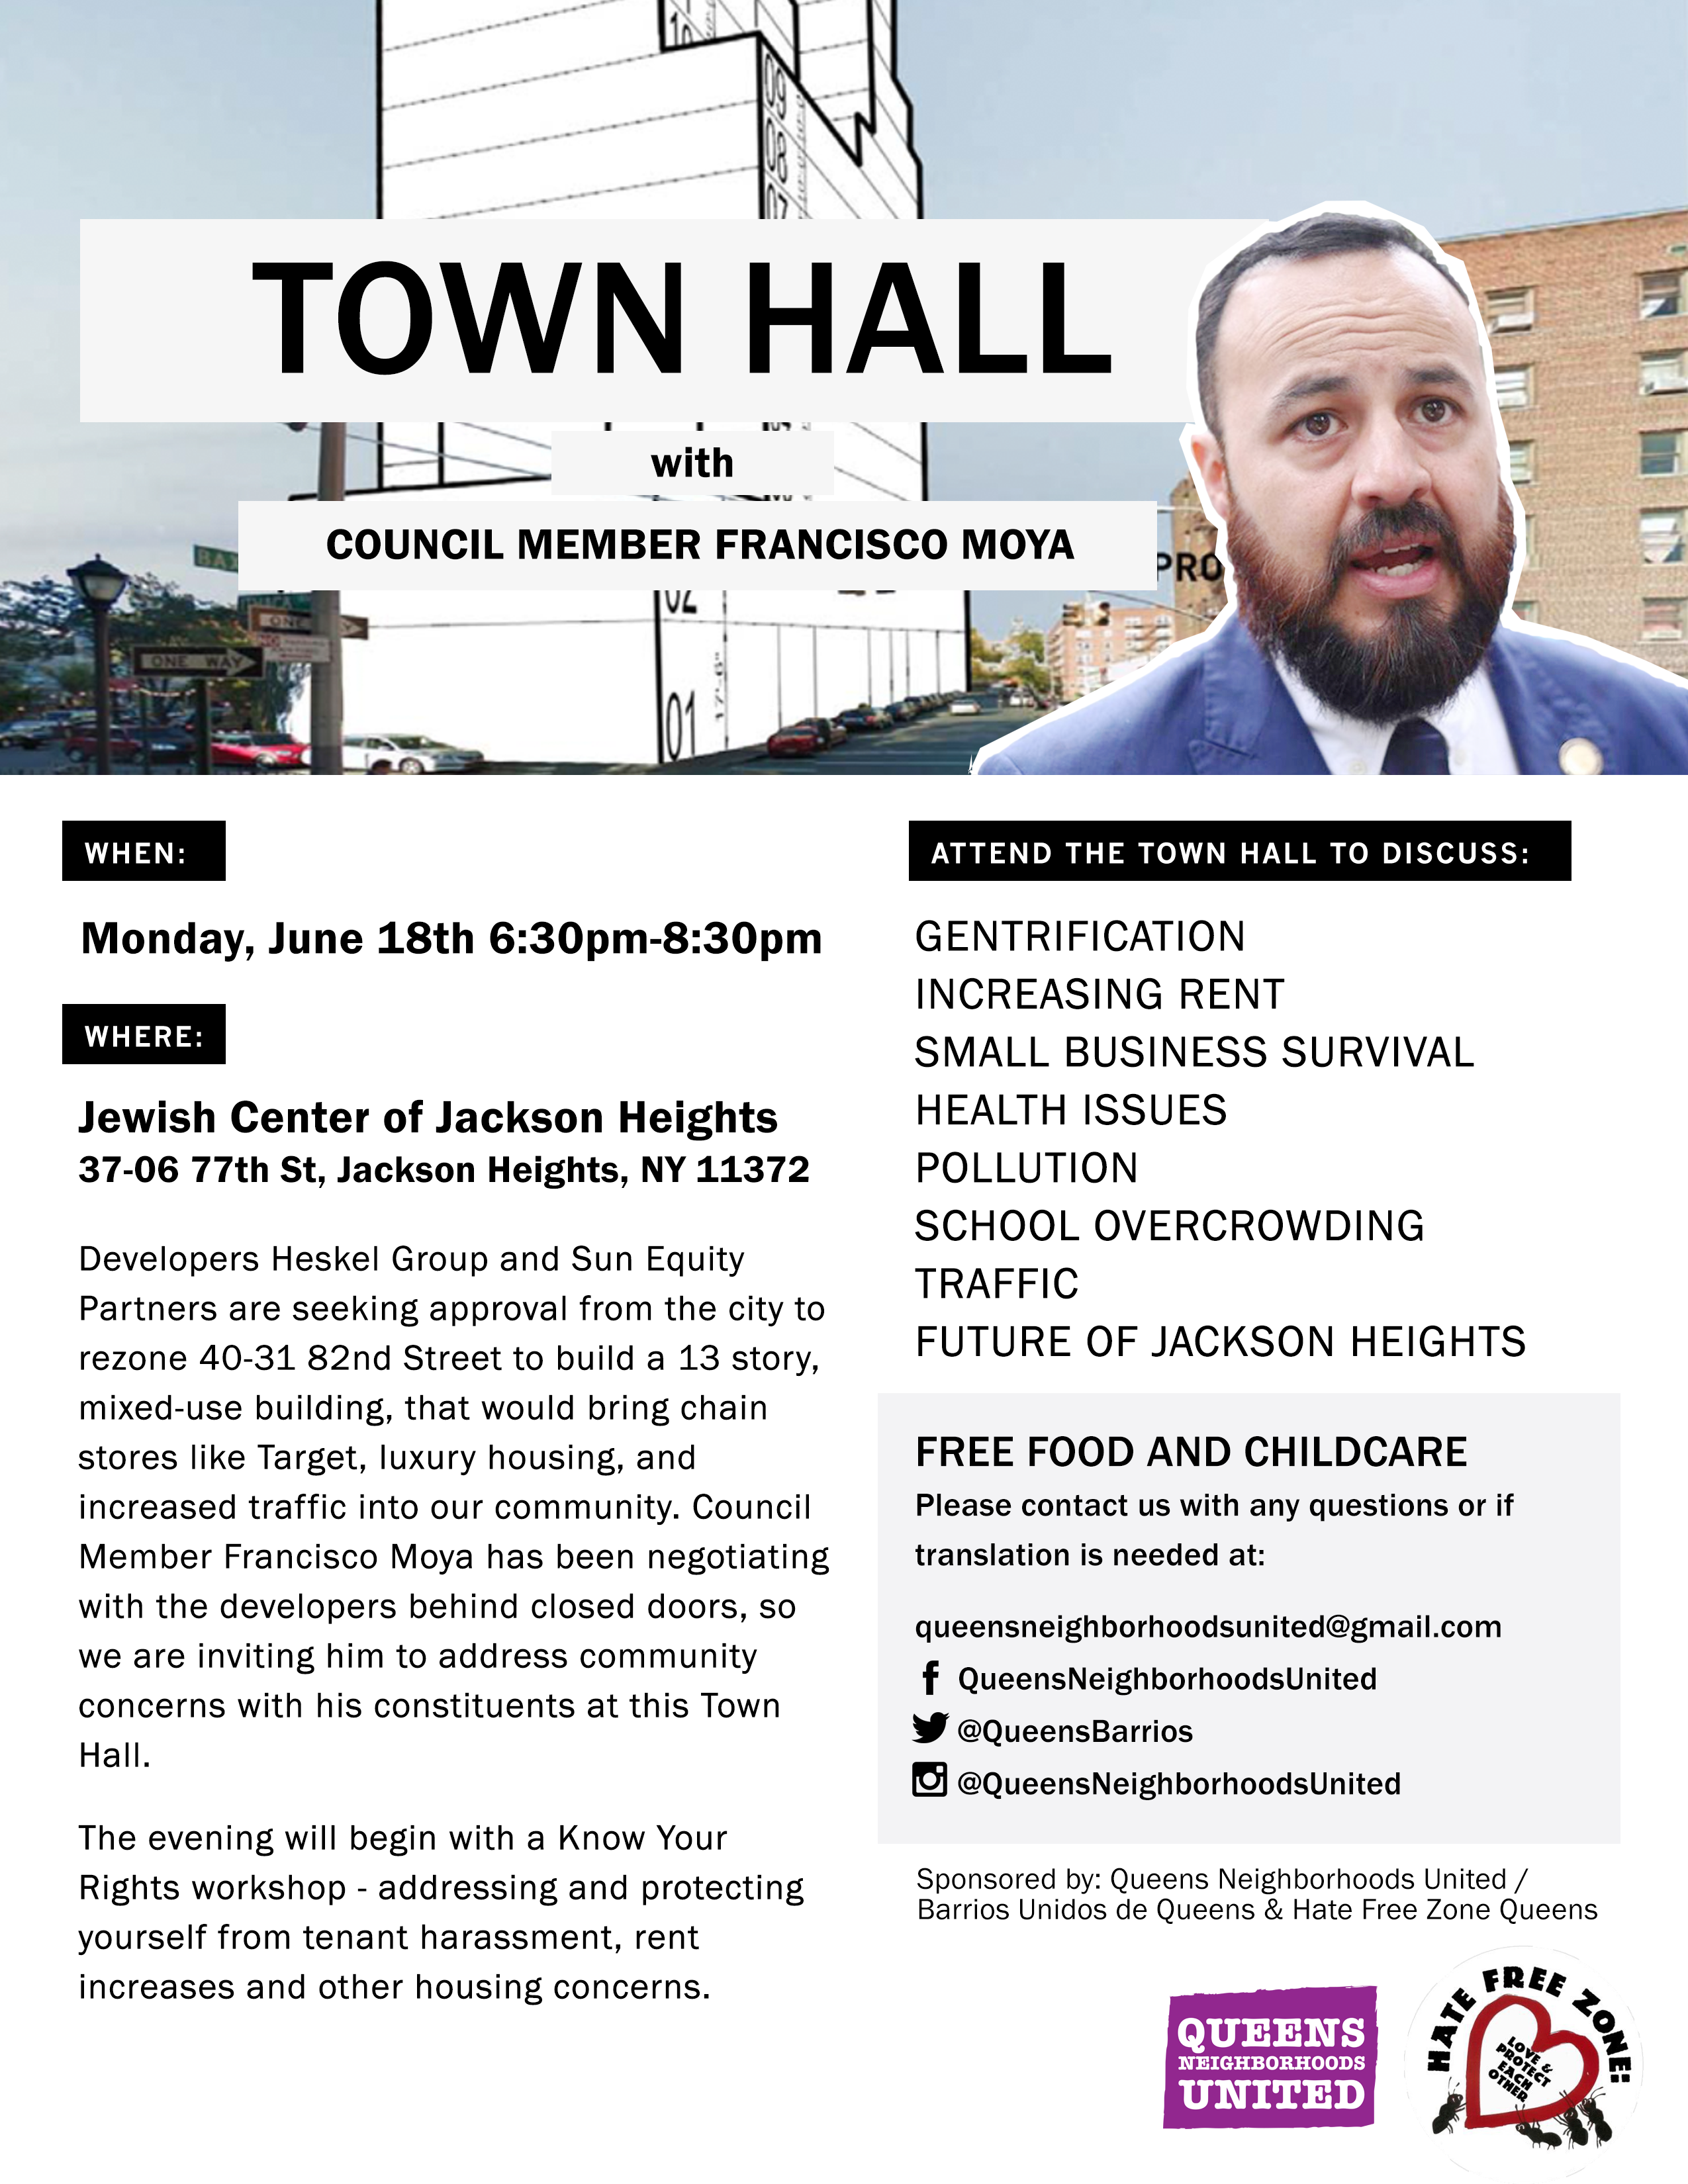 Flyer for QNU townhall